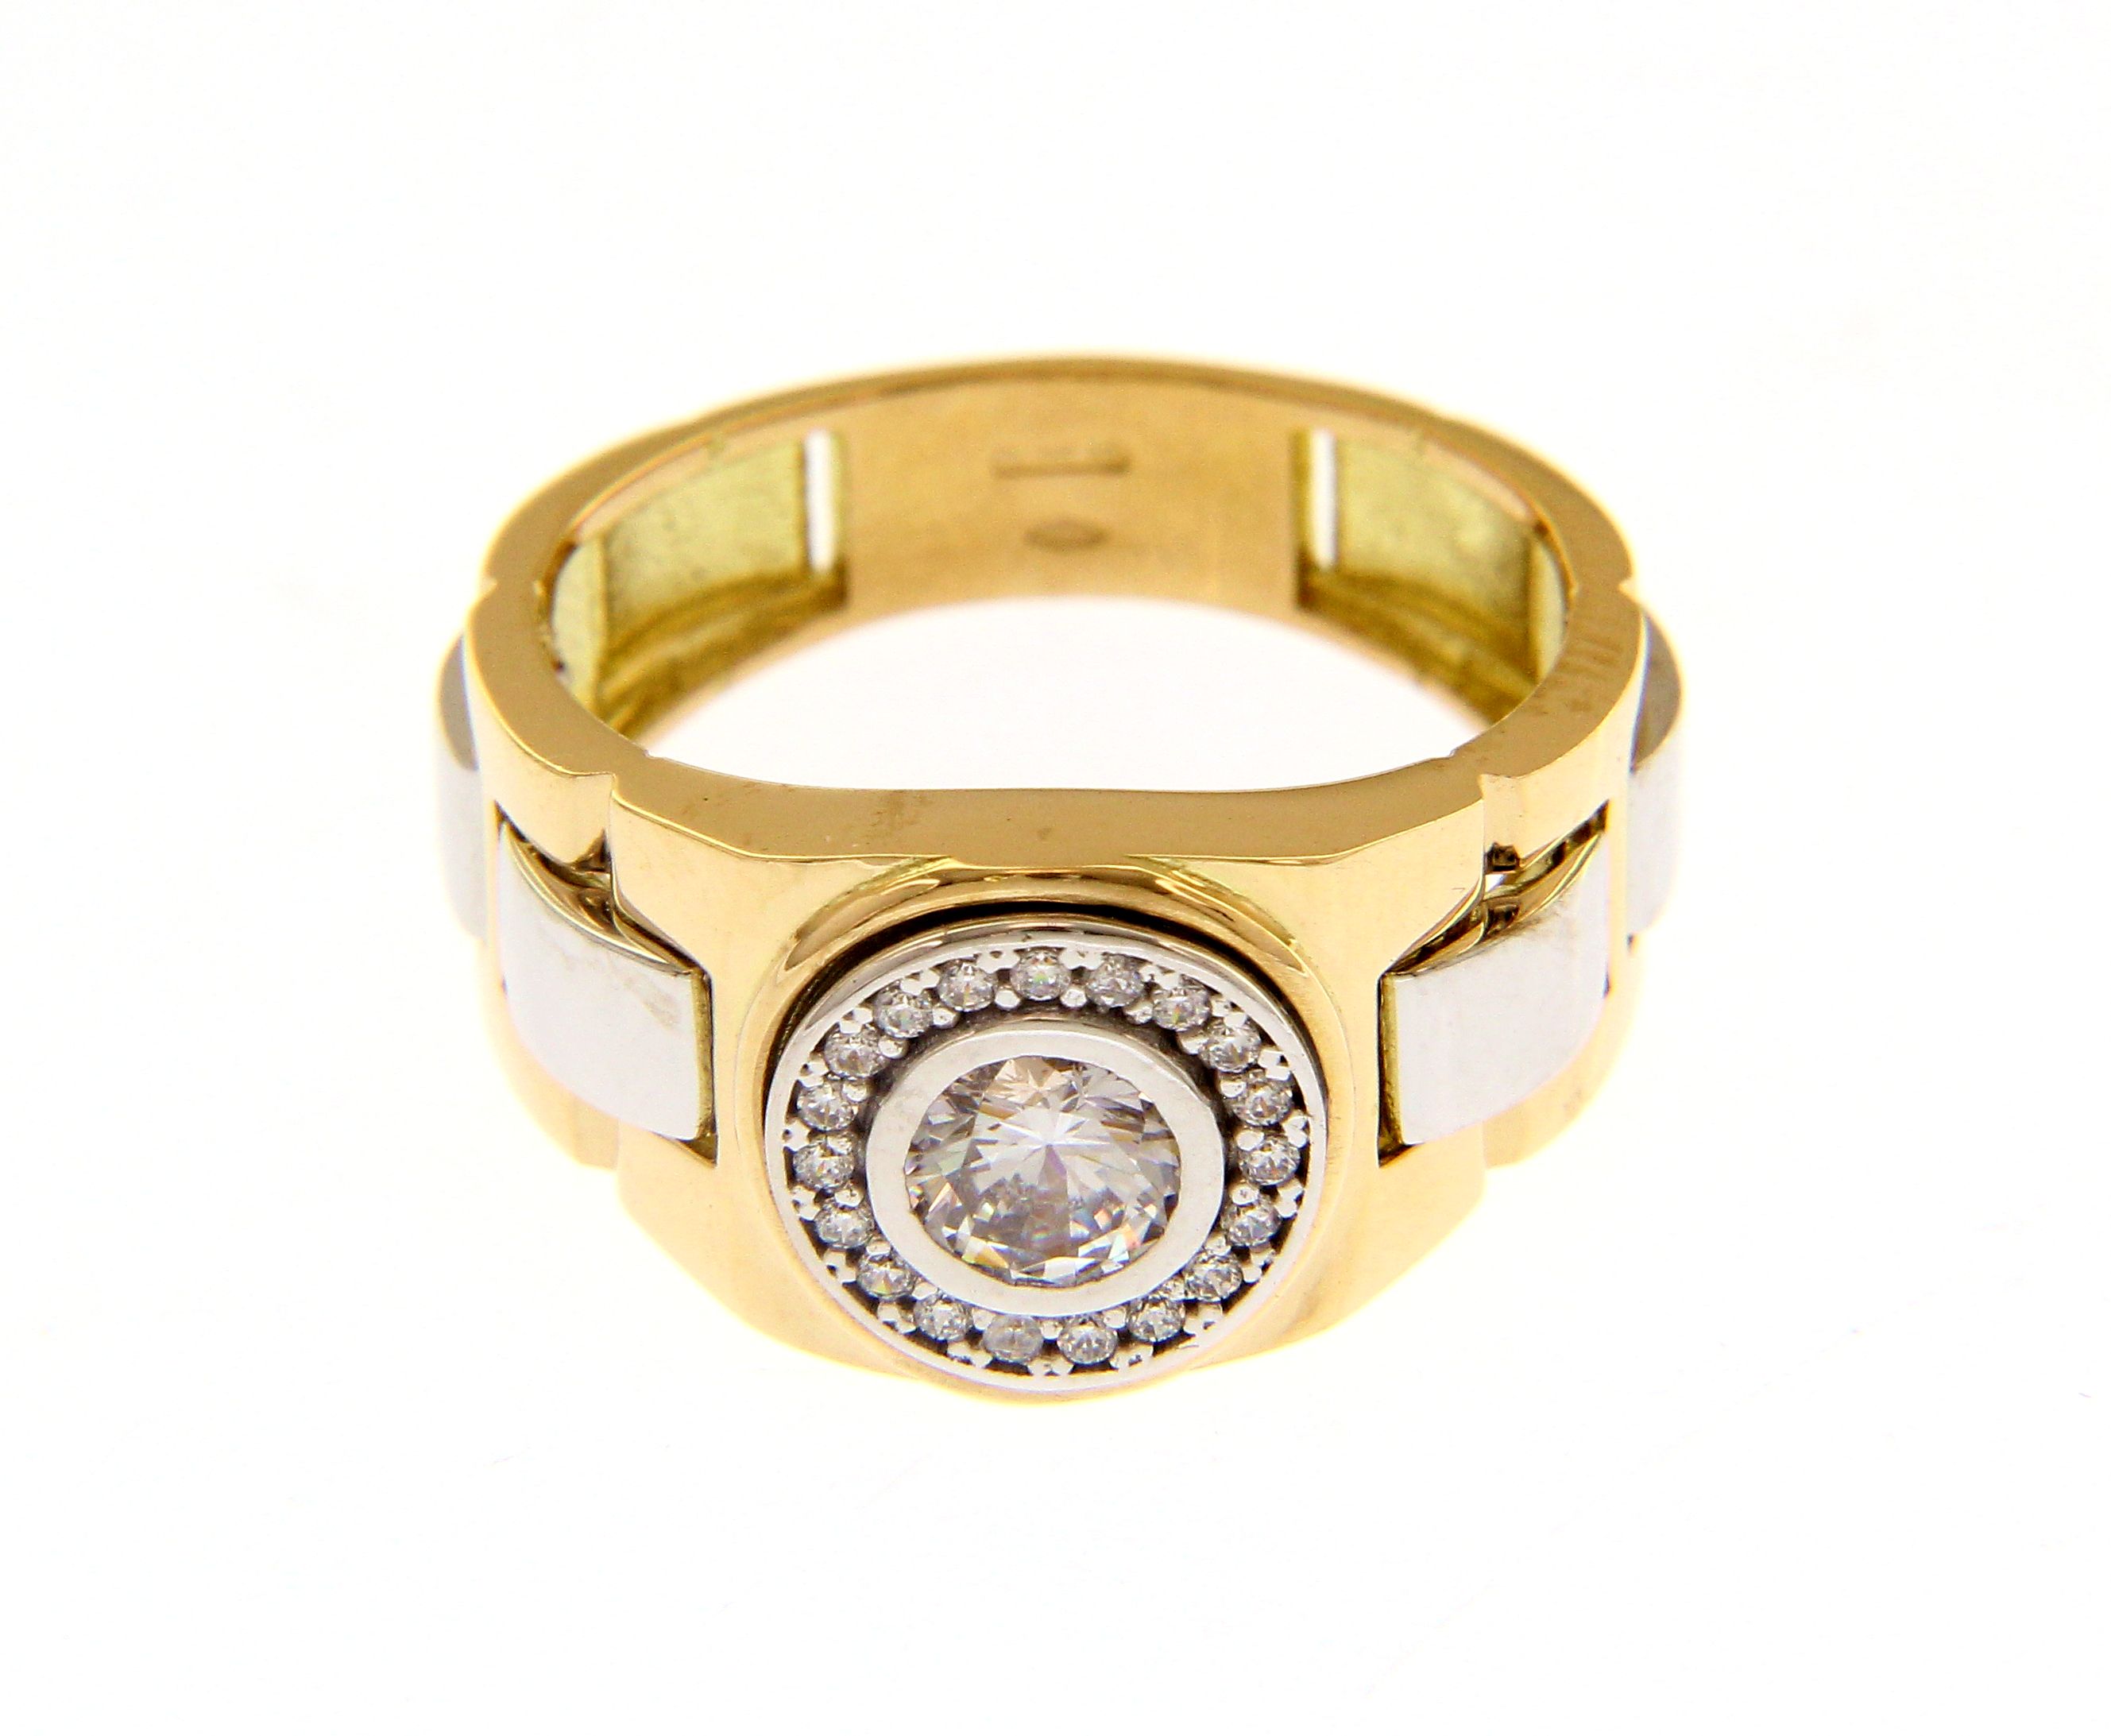 Stylish and bold 18ct Yellow gold Ring with Cubic Zirconia